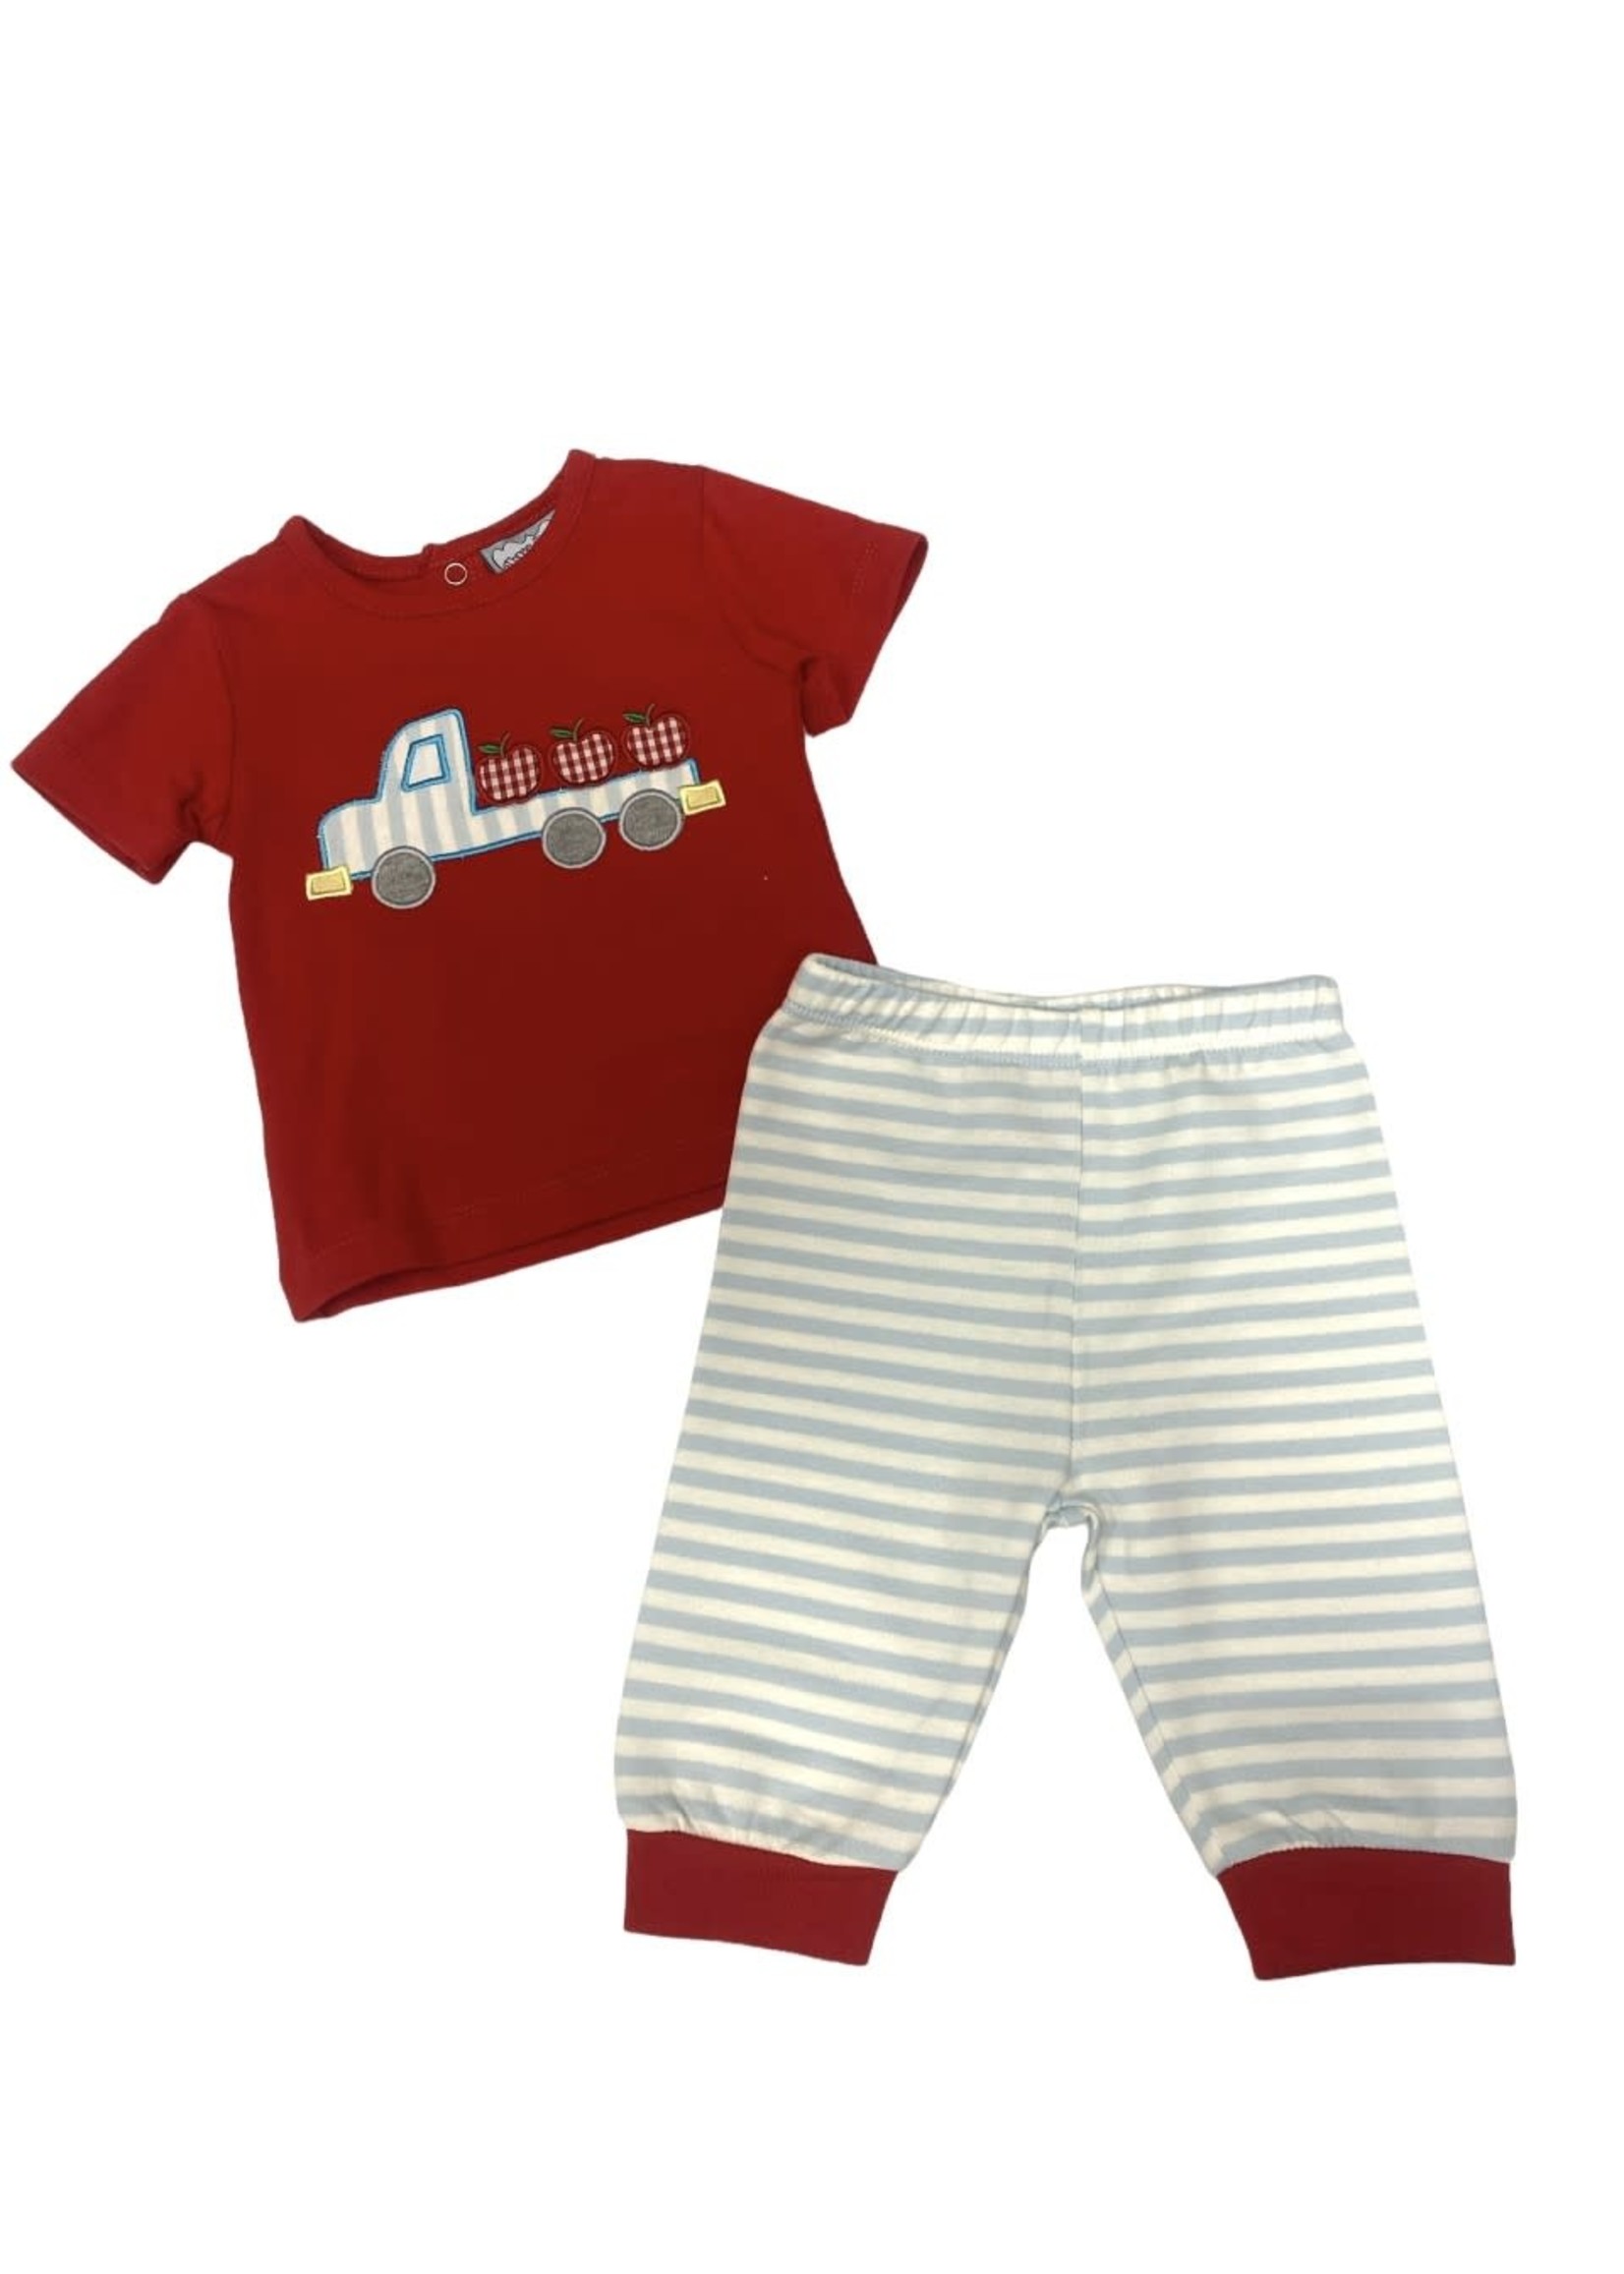 Three Sisters Apple A Day Applique Boys 2 Pc Set